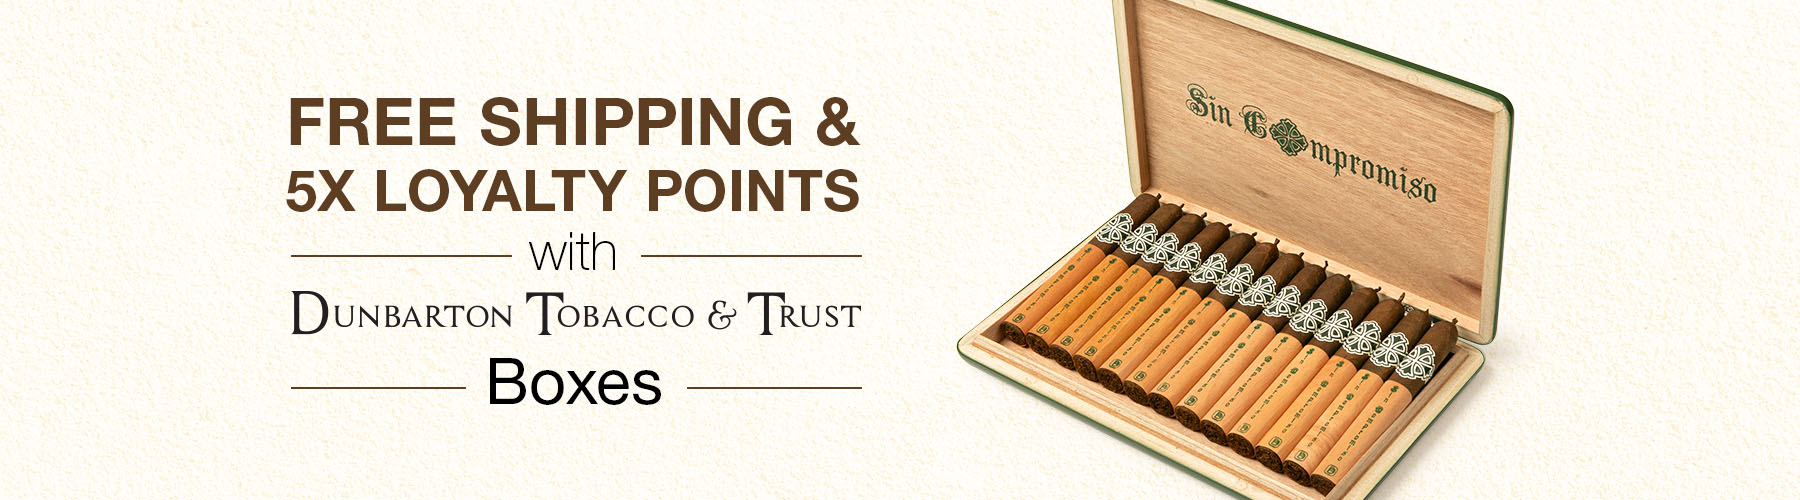 'Free Shipping & 5X Loyalty Points with Dunbarton Tobacco & Trust boxes!